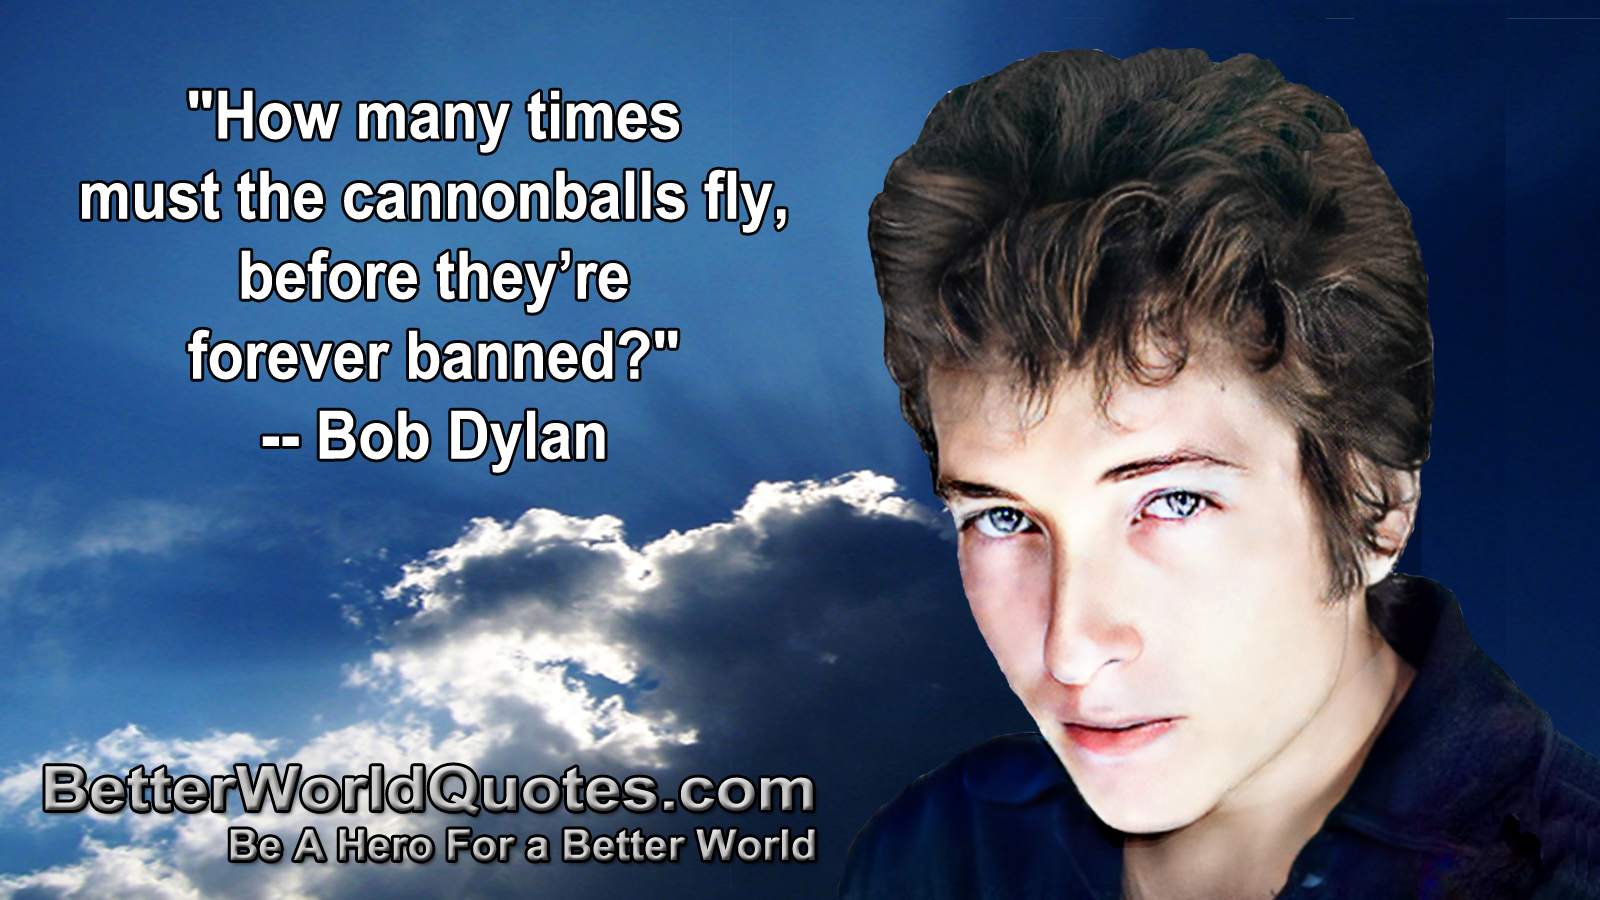 "How may times must the cannonballs fly, before they're forever banned?" -- Bob Dylan